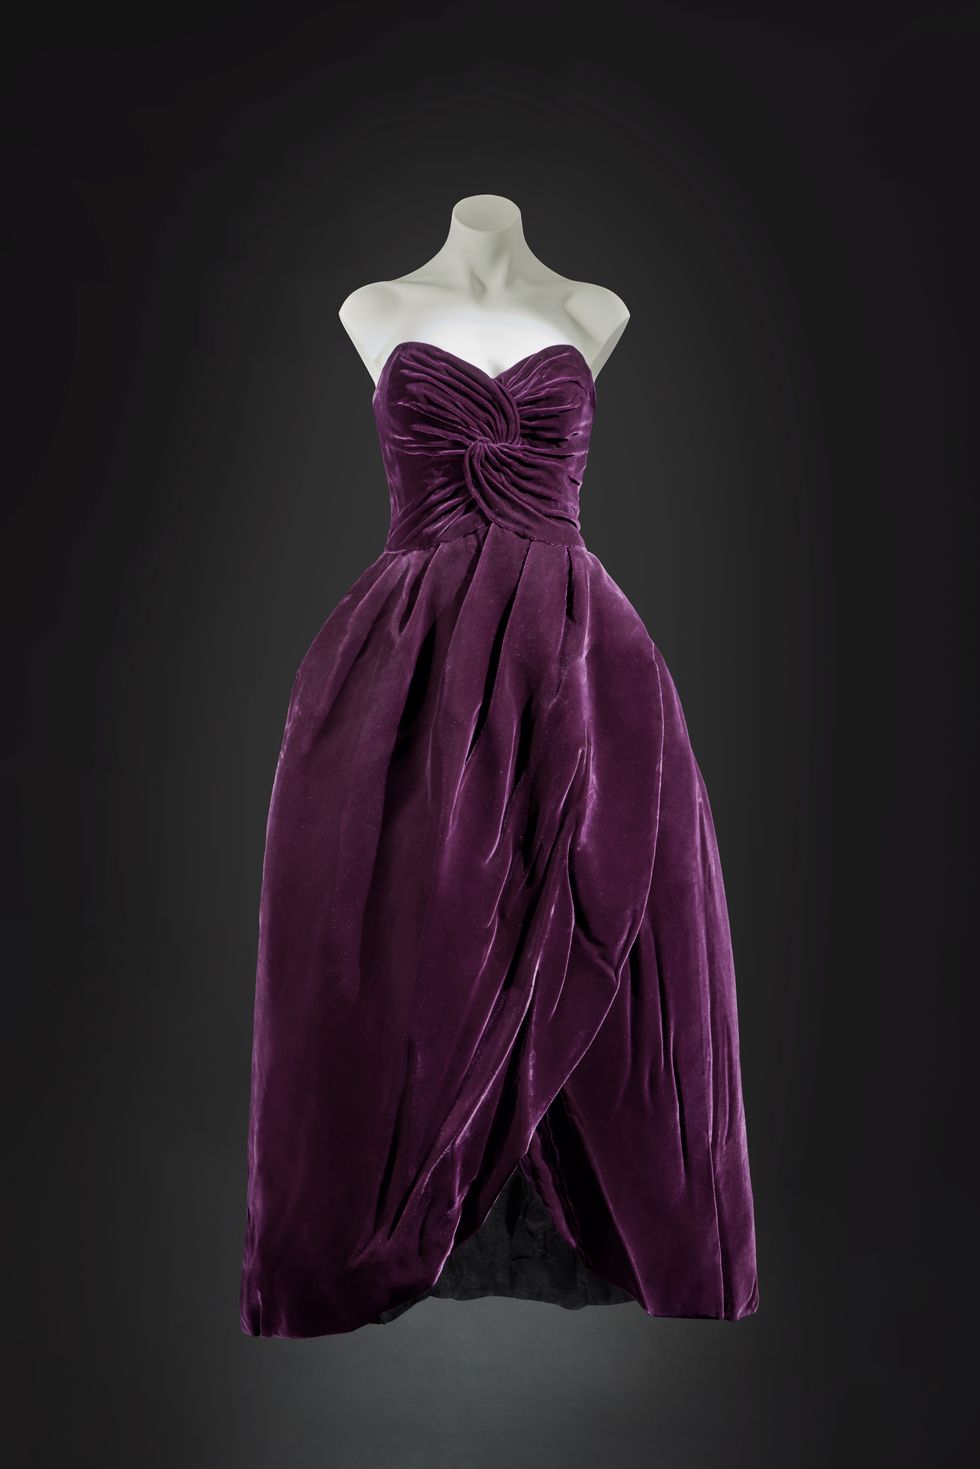 princess diana the ball dress of deep aubergine silk velvet with a tulipshaped stiffened skirt augmented by three paste buttons at the back﻿ was designed by society dressmaker victor edelstein